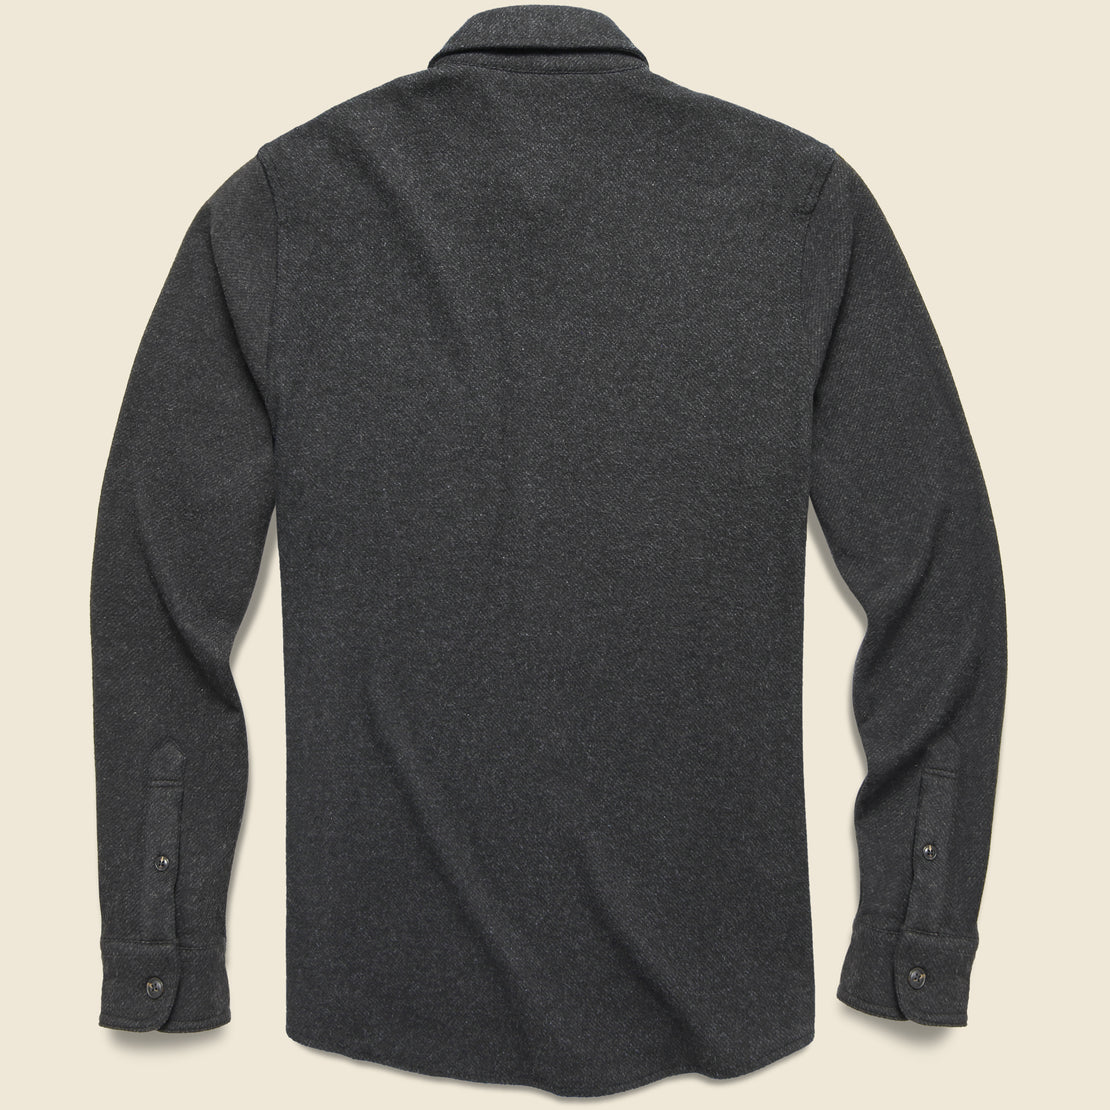 Legend Sweater Shirt - Heathered Black Twill - Faherty - STAG Provisions - Tops - L/S Woven - Solid